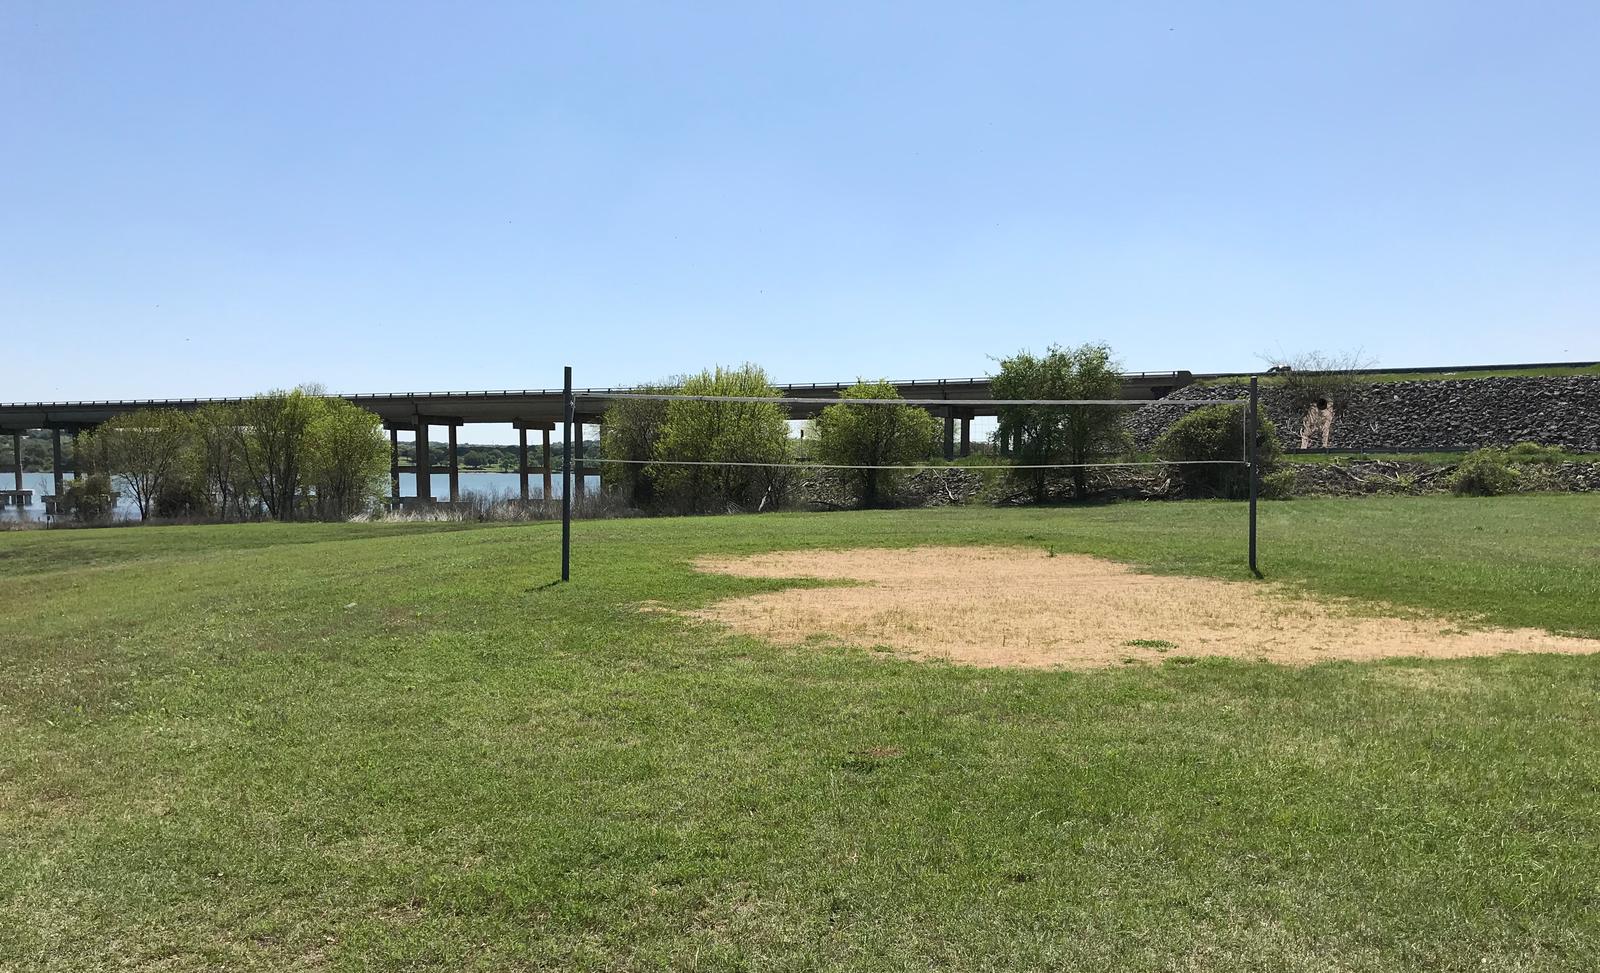 Sand volleyball court located in Group Shelter area